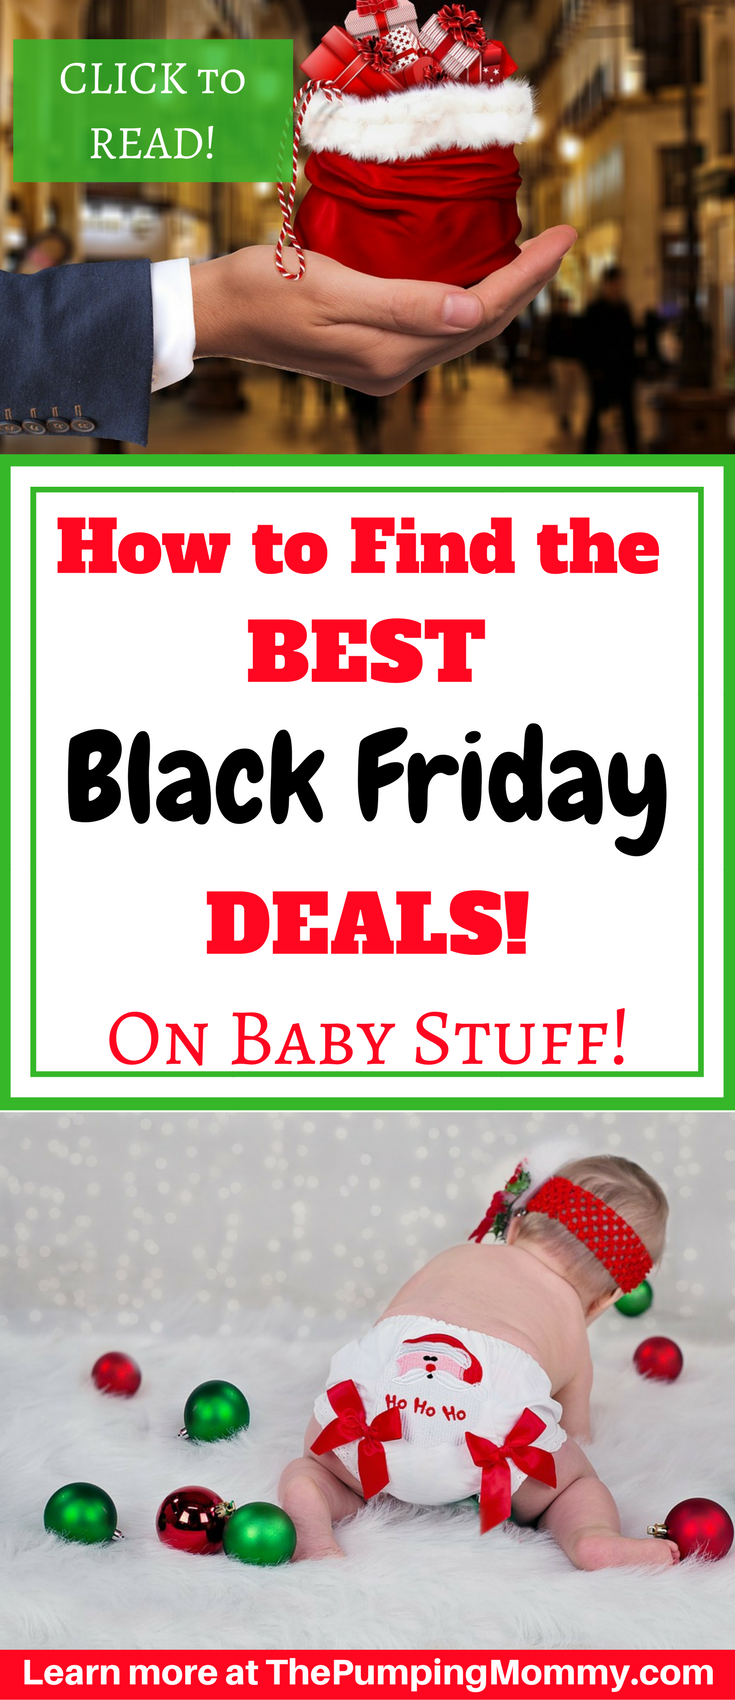 How to Find the Best Black Friday Deals on Baby Stuff